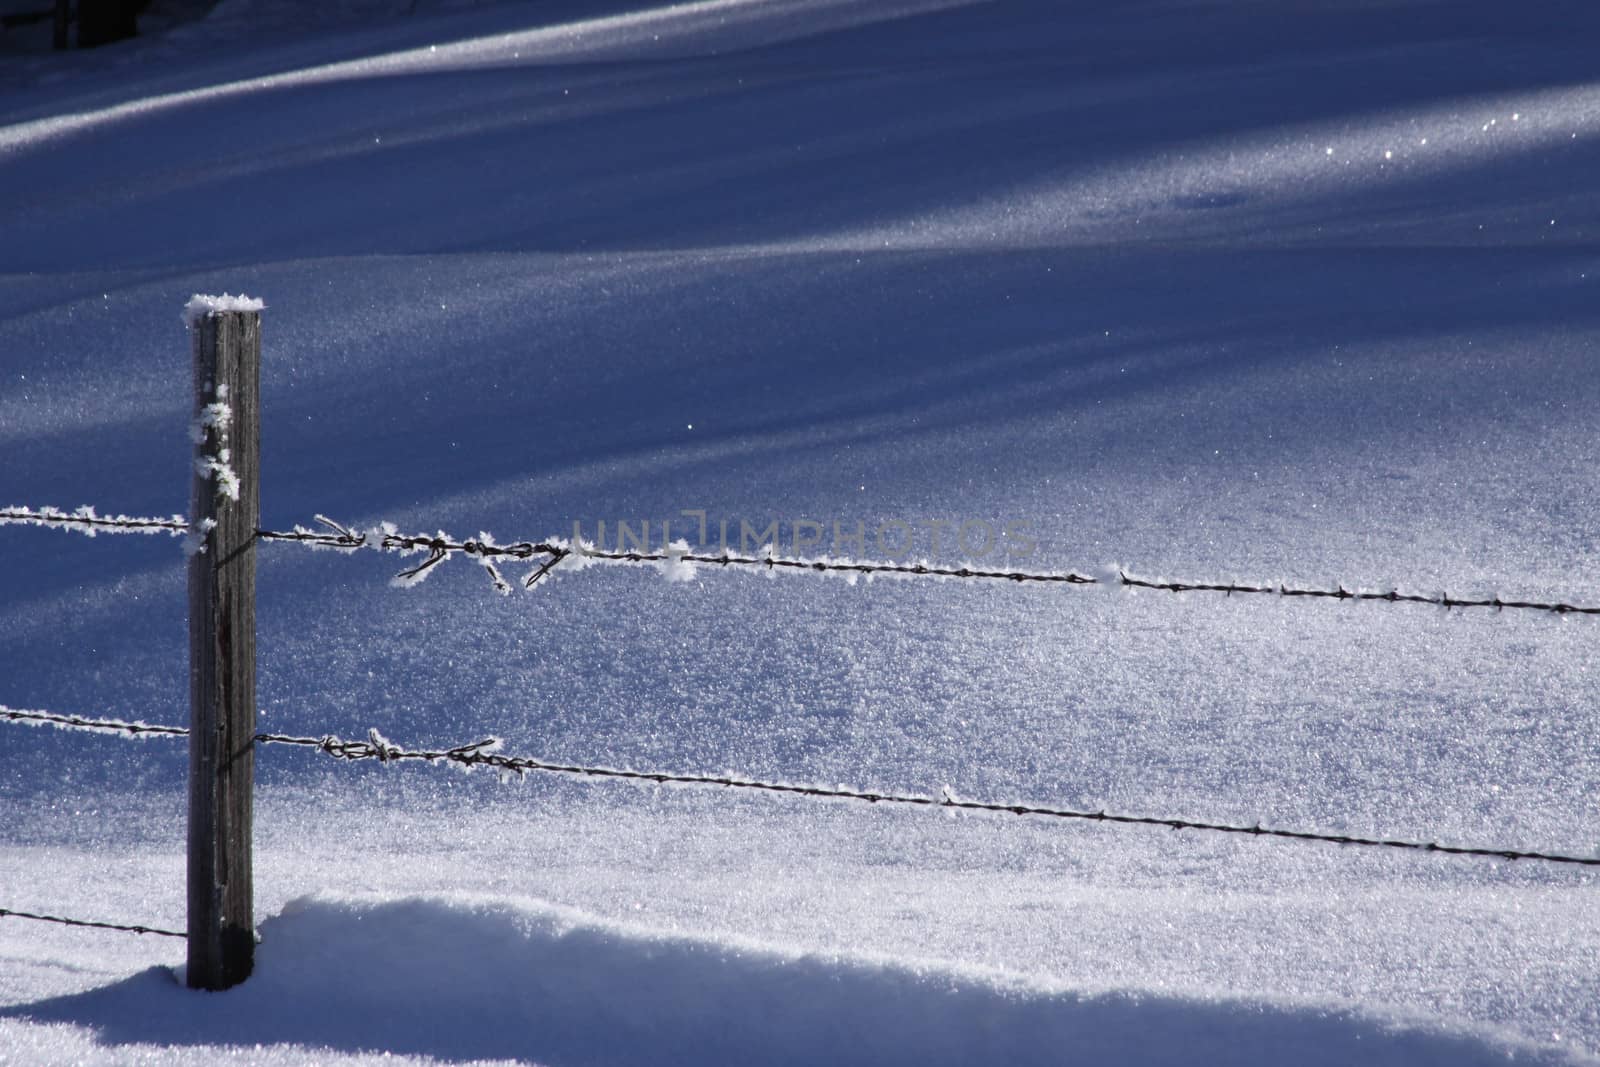 A barbed wire fence covered in Hoar Frost and snow.